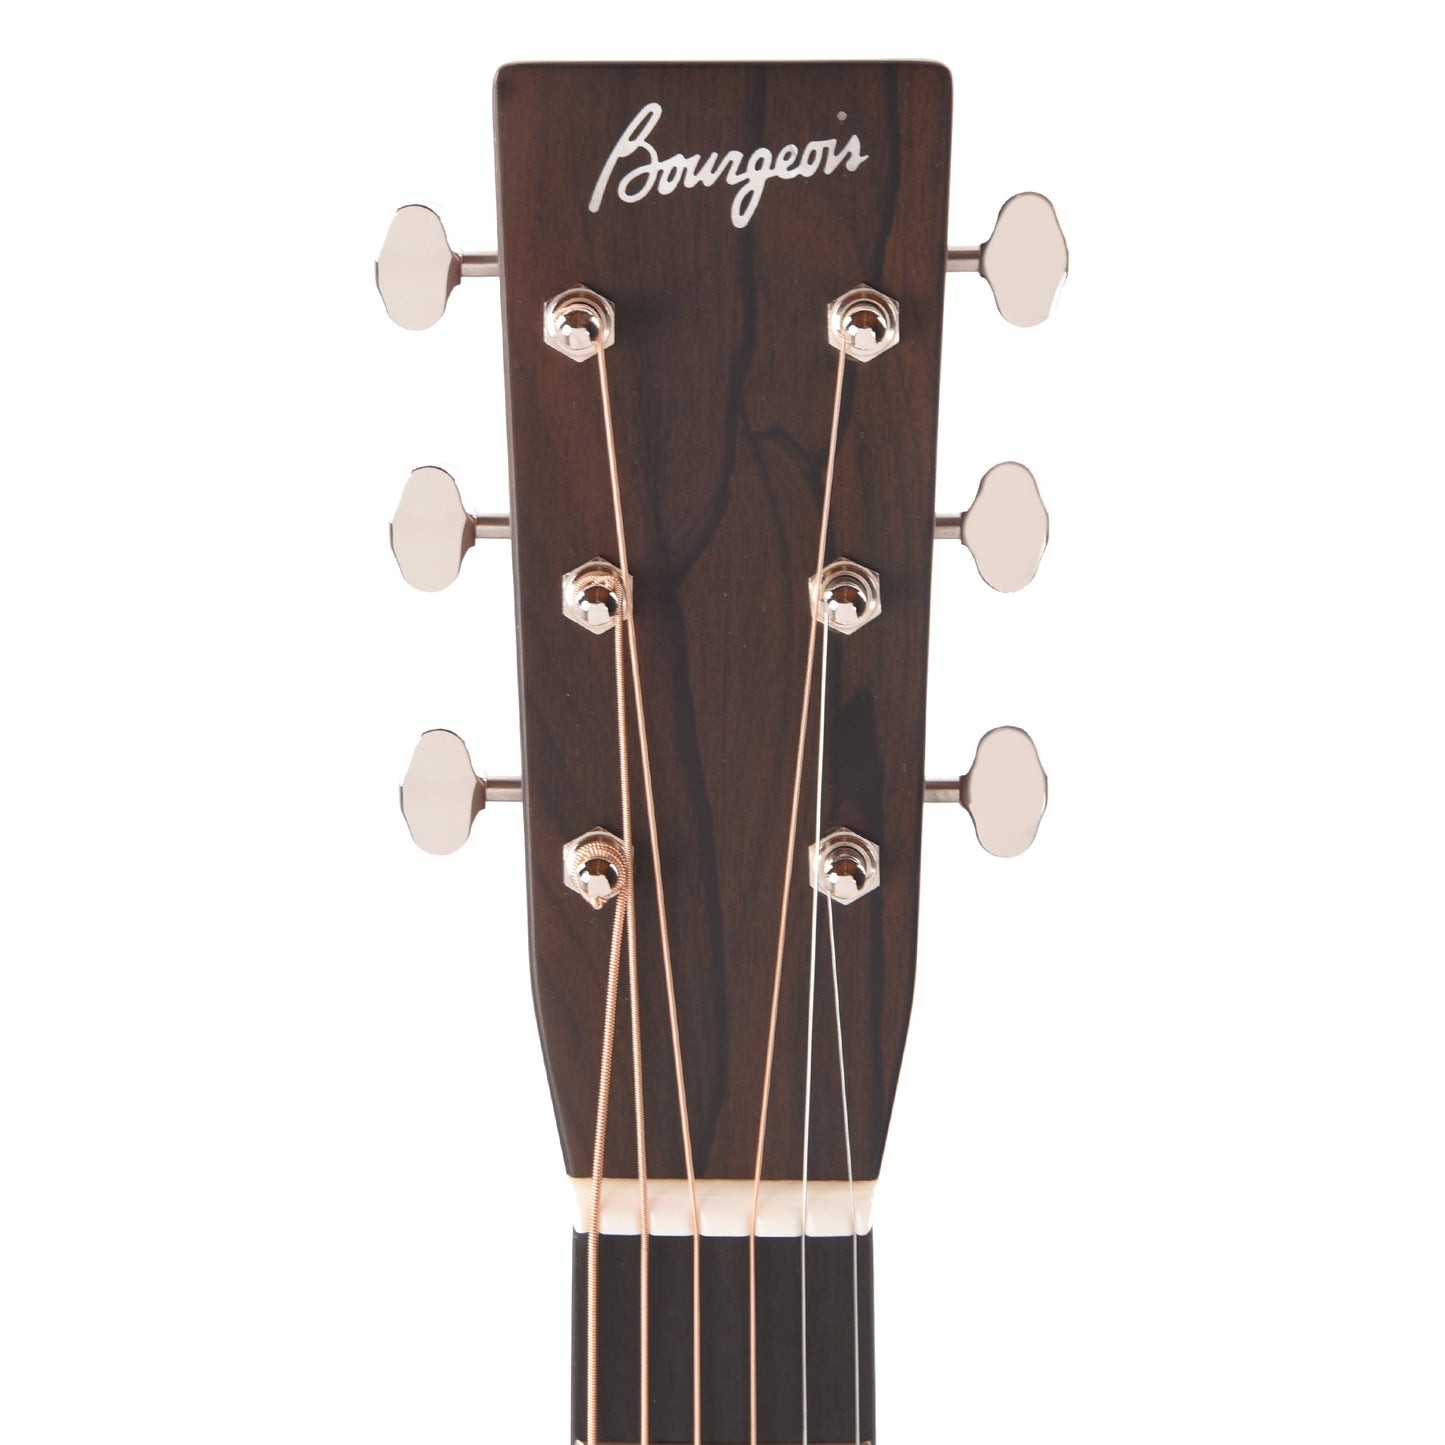 Bourgeois Touchstone Country Boy OM Alaskan Sitka/Mahogany Natural